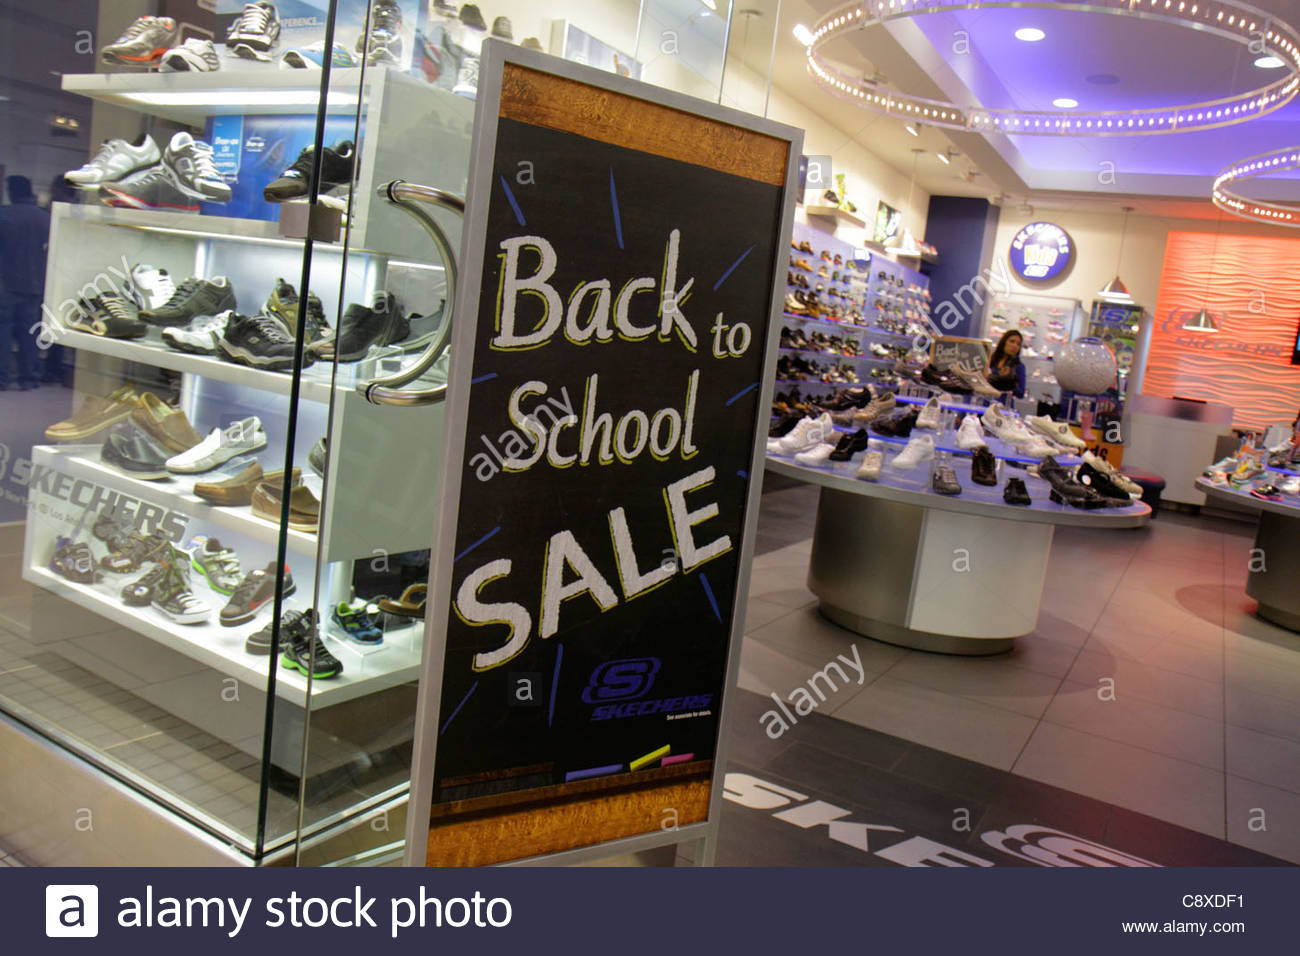 Buy stores that sell sketcher shoes